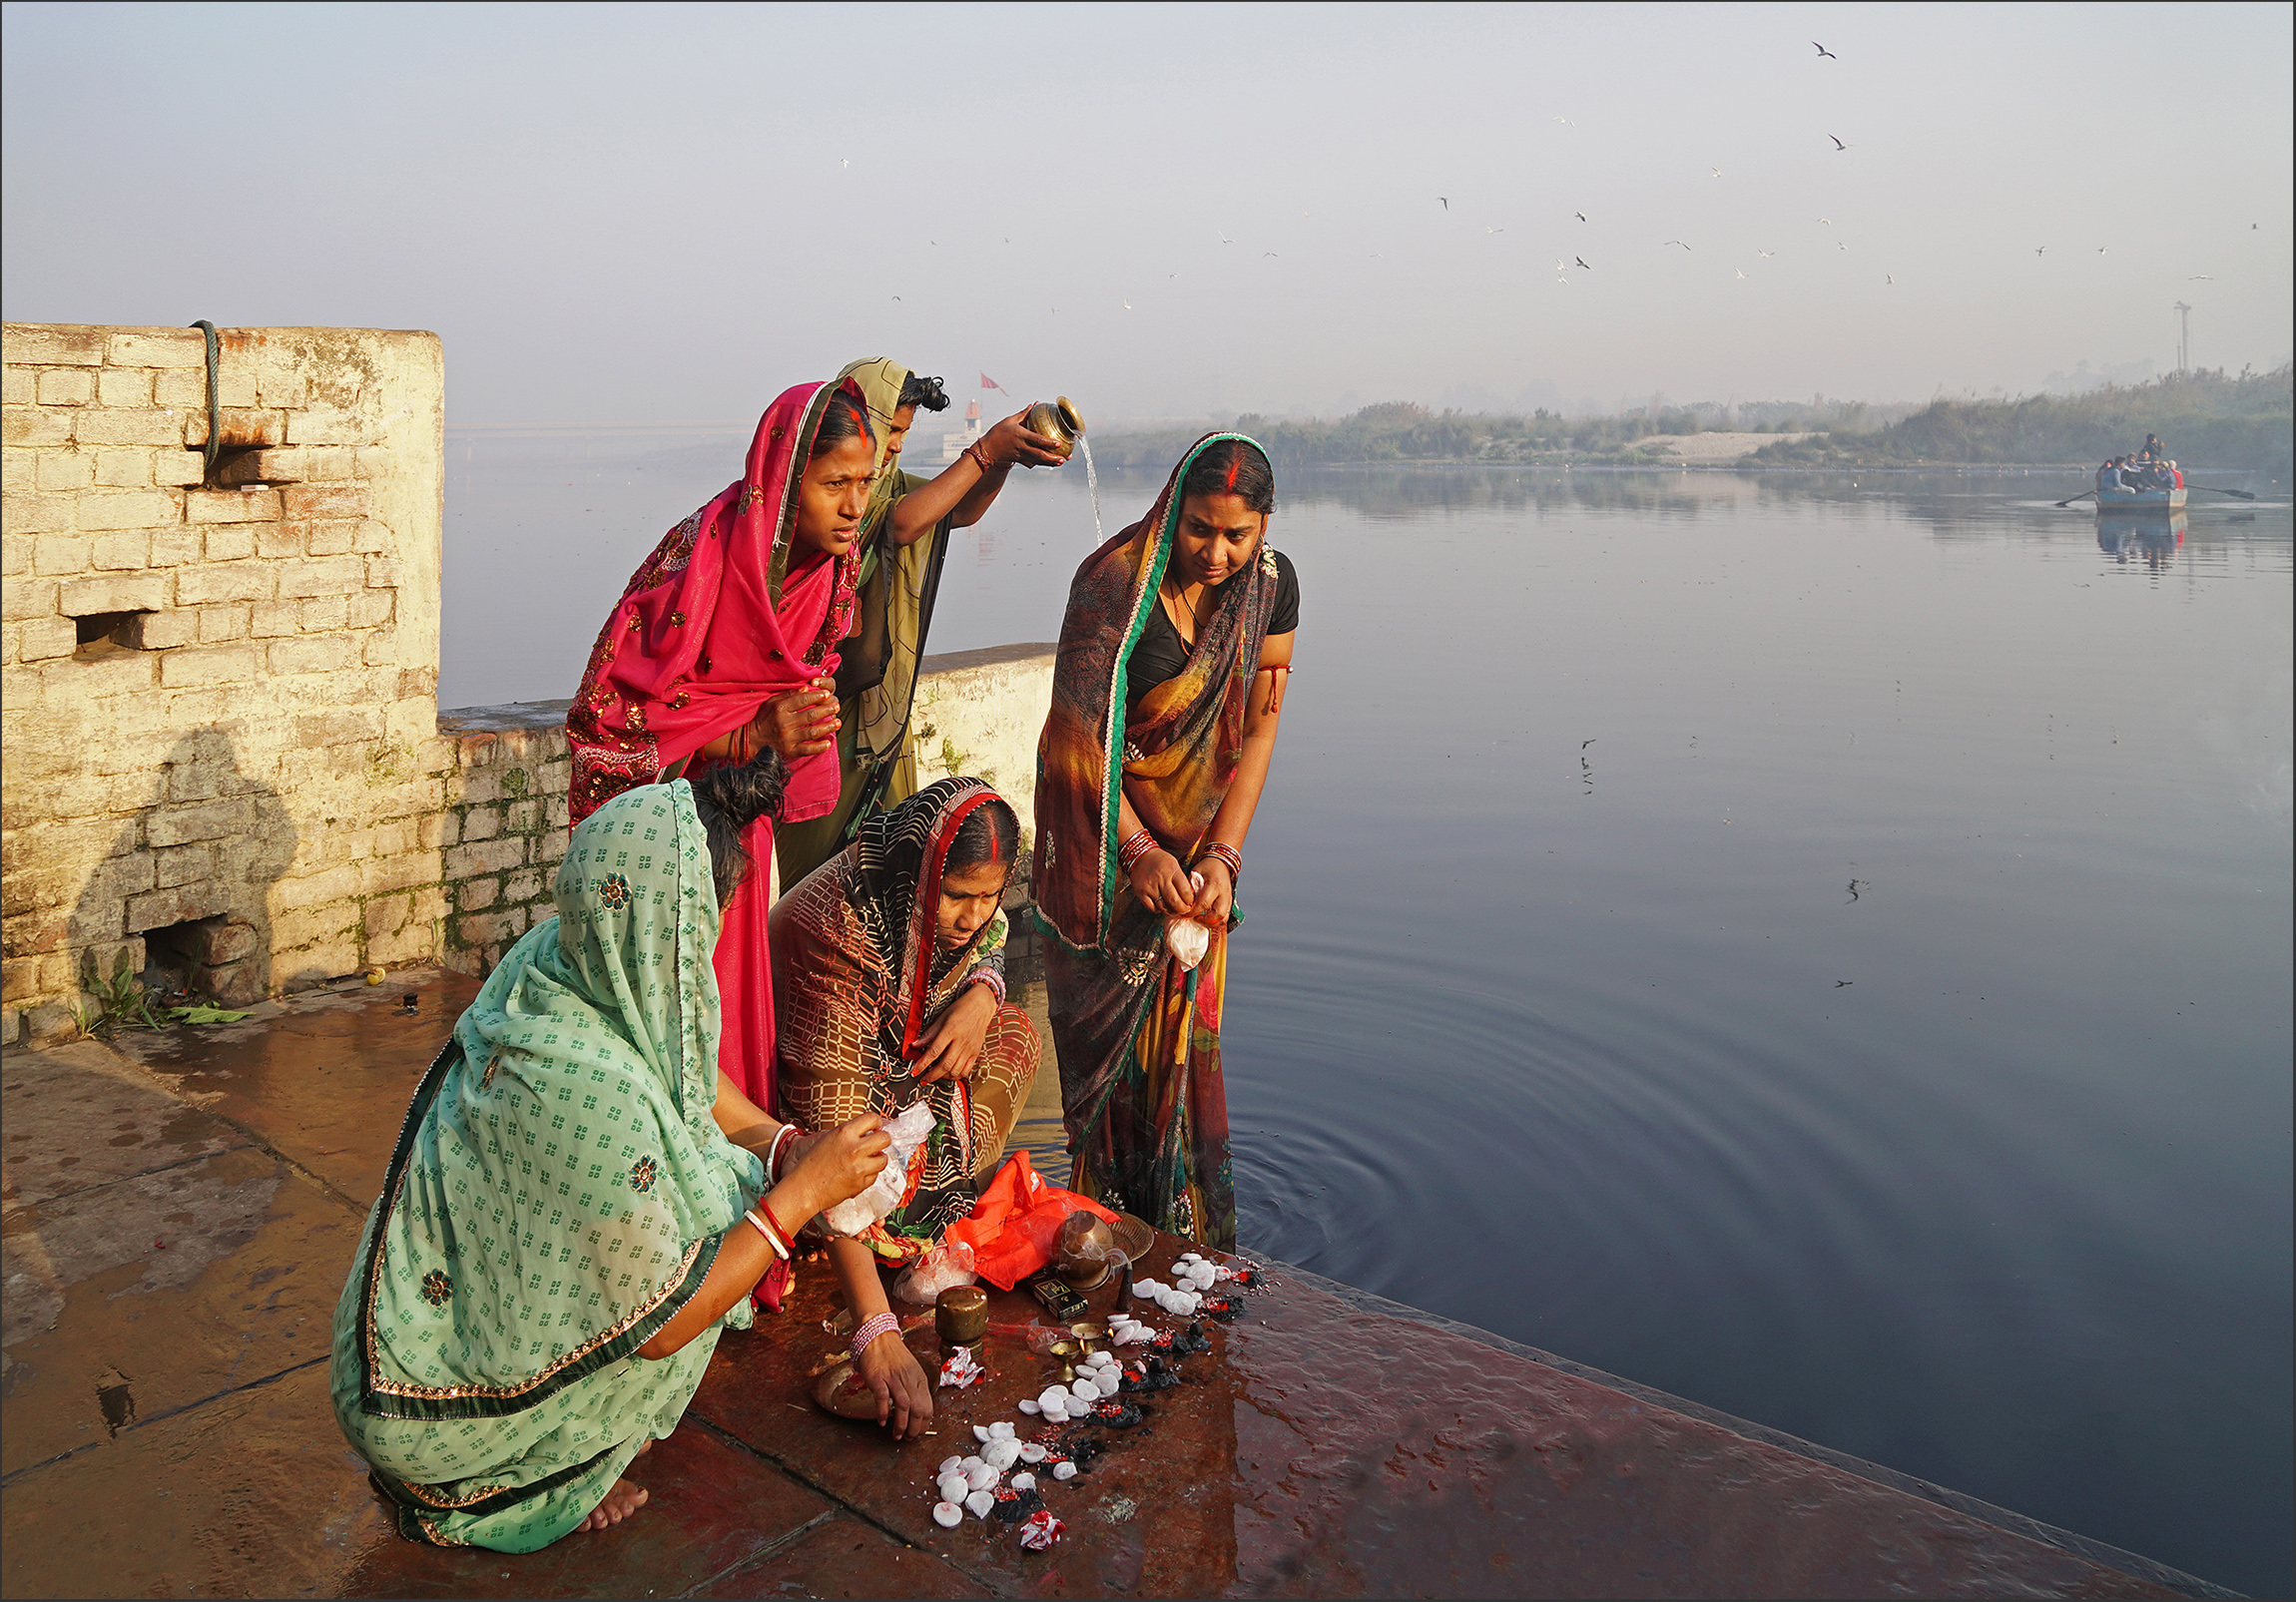 On the auspicious occasion of Makar Sankranti, the Hindu New year, women perform the festival rituals after taking a dip in the river at the banks in Delhi. All orthodox devotees have continued these traditions for ages and still continue despite the river’s grim conditions.